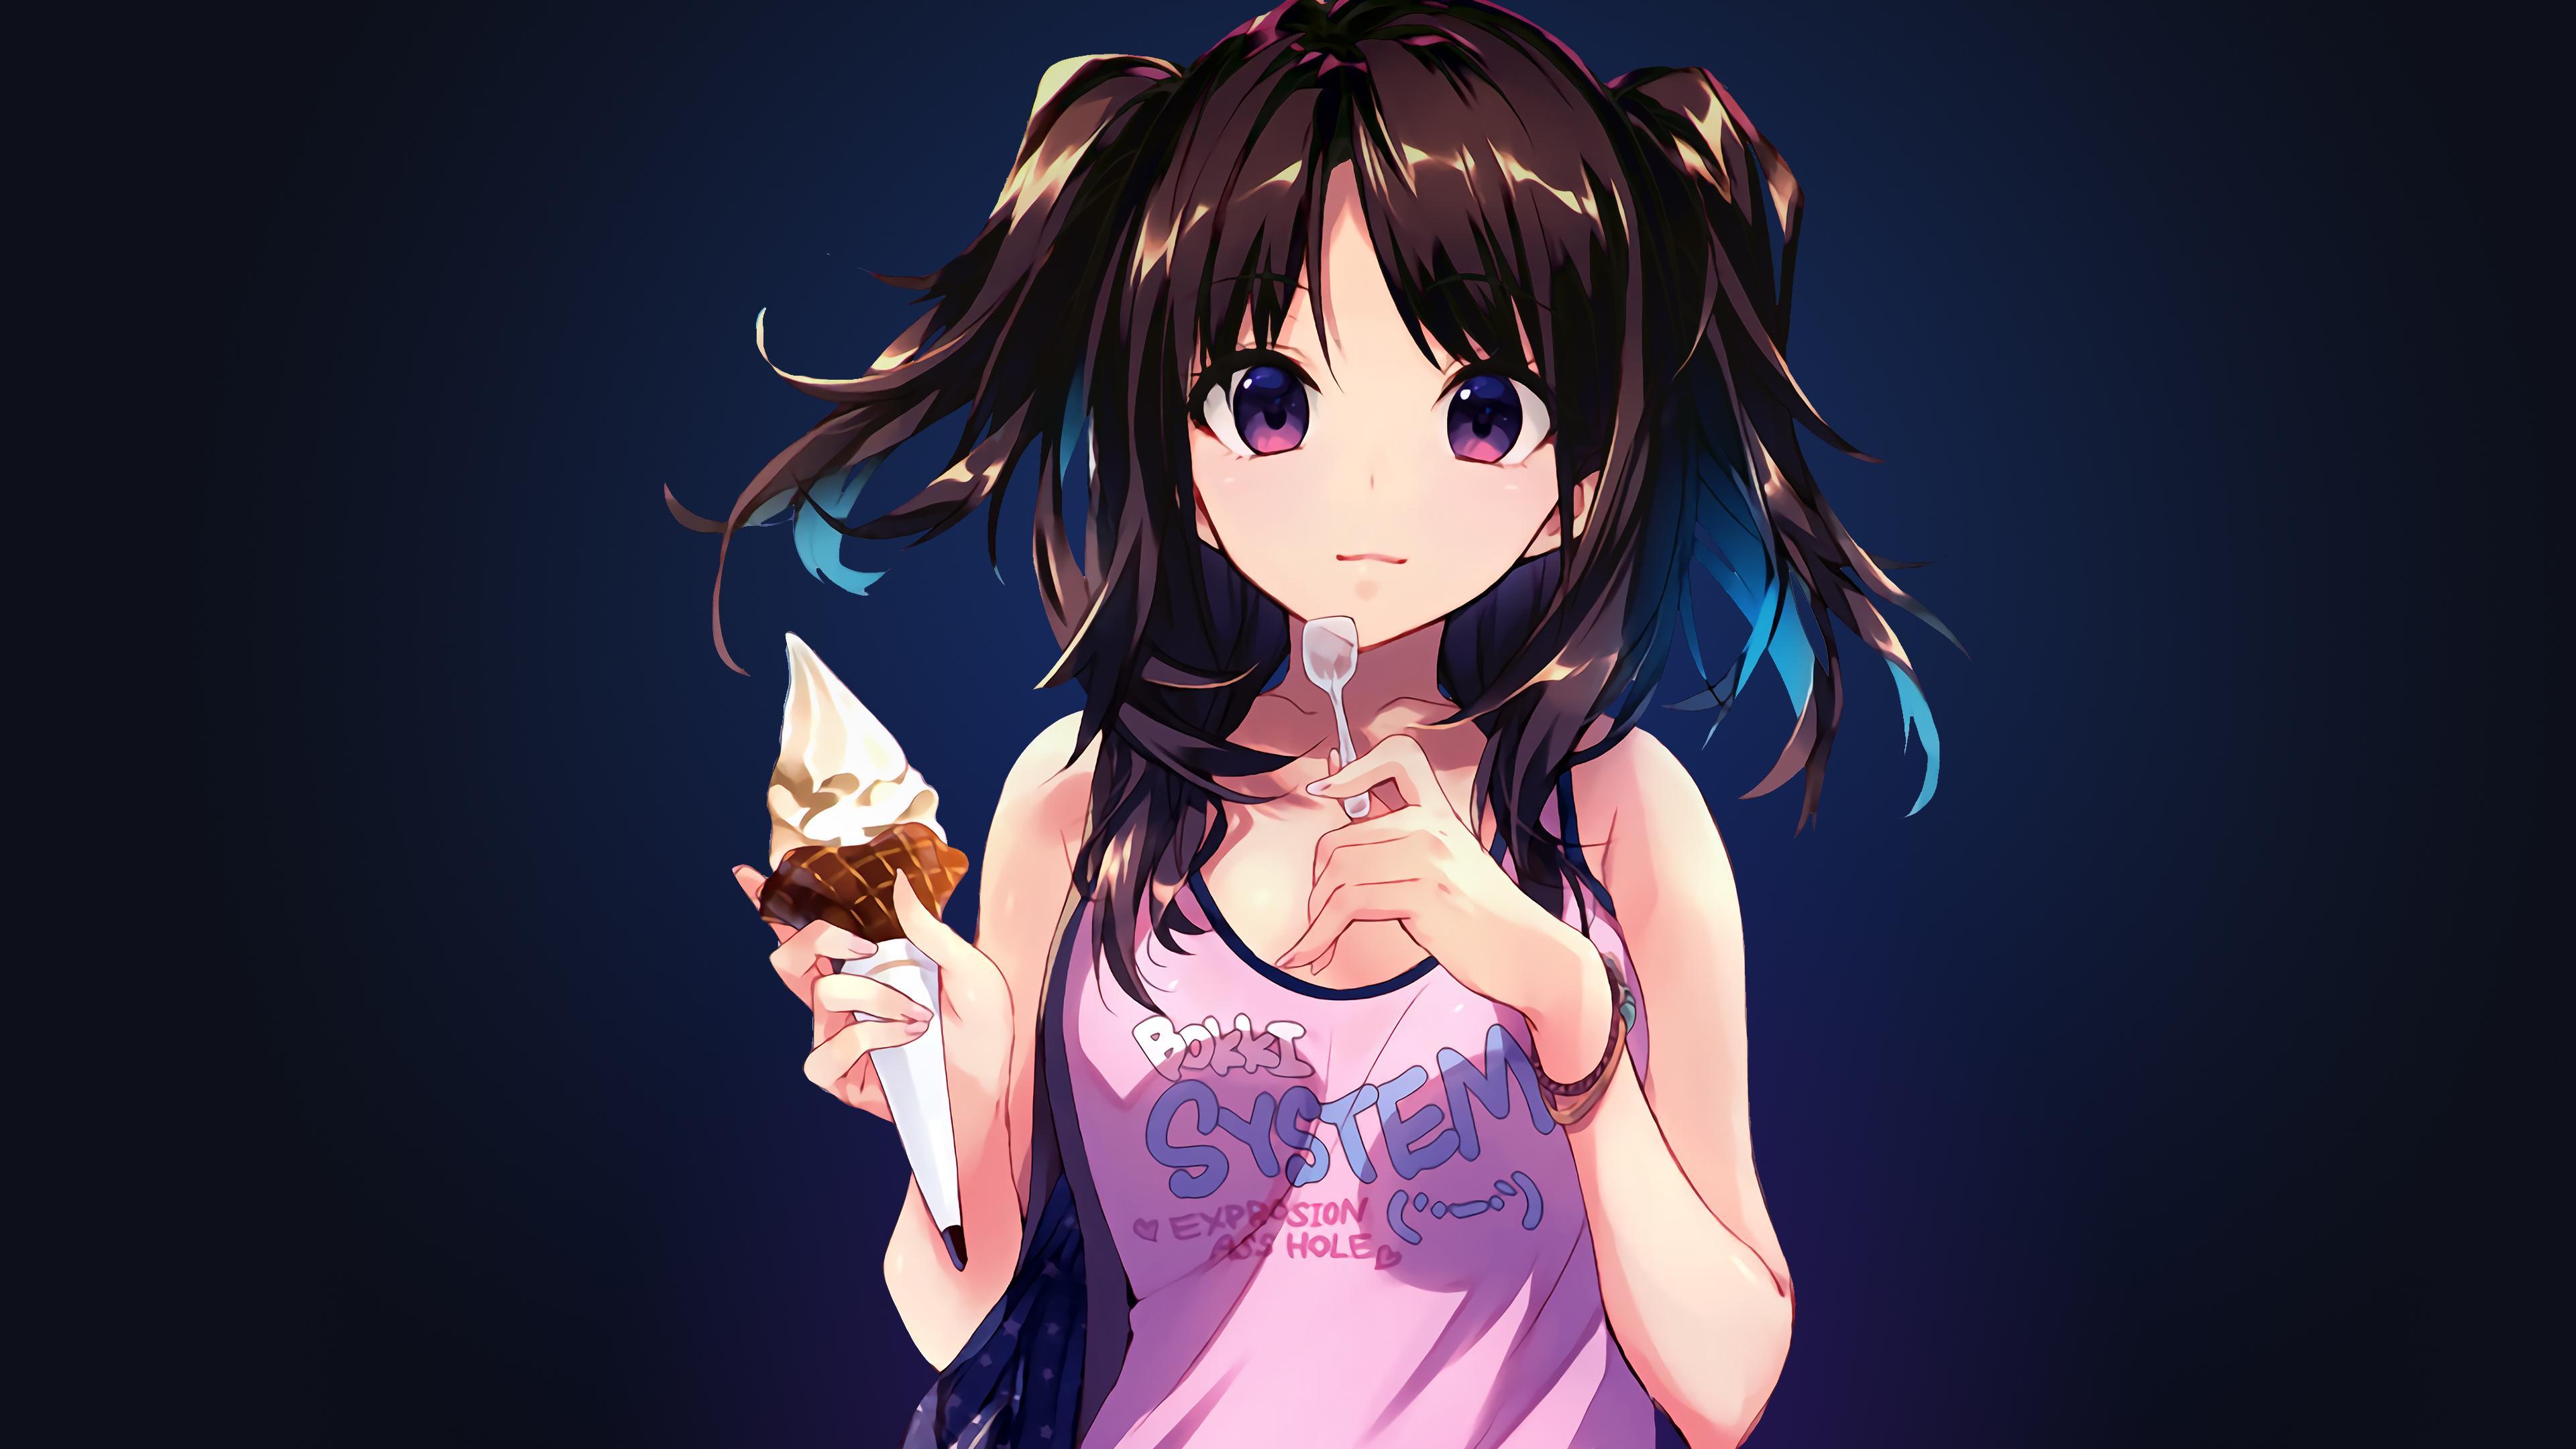 Anime Girl With Ice Cream Wallpaper Background 62680 3840x2160px